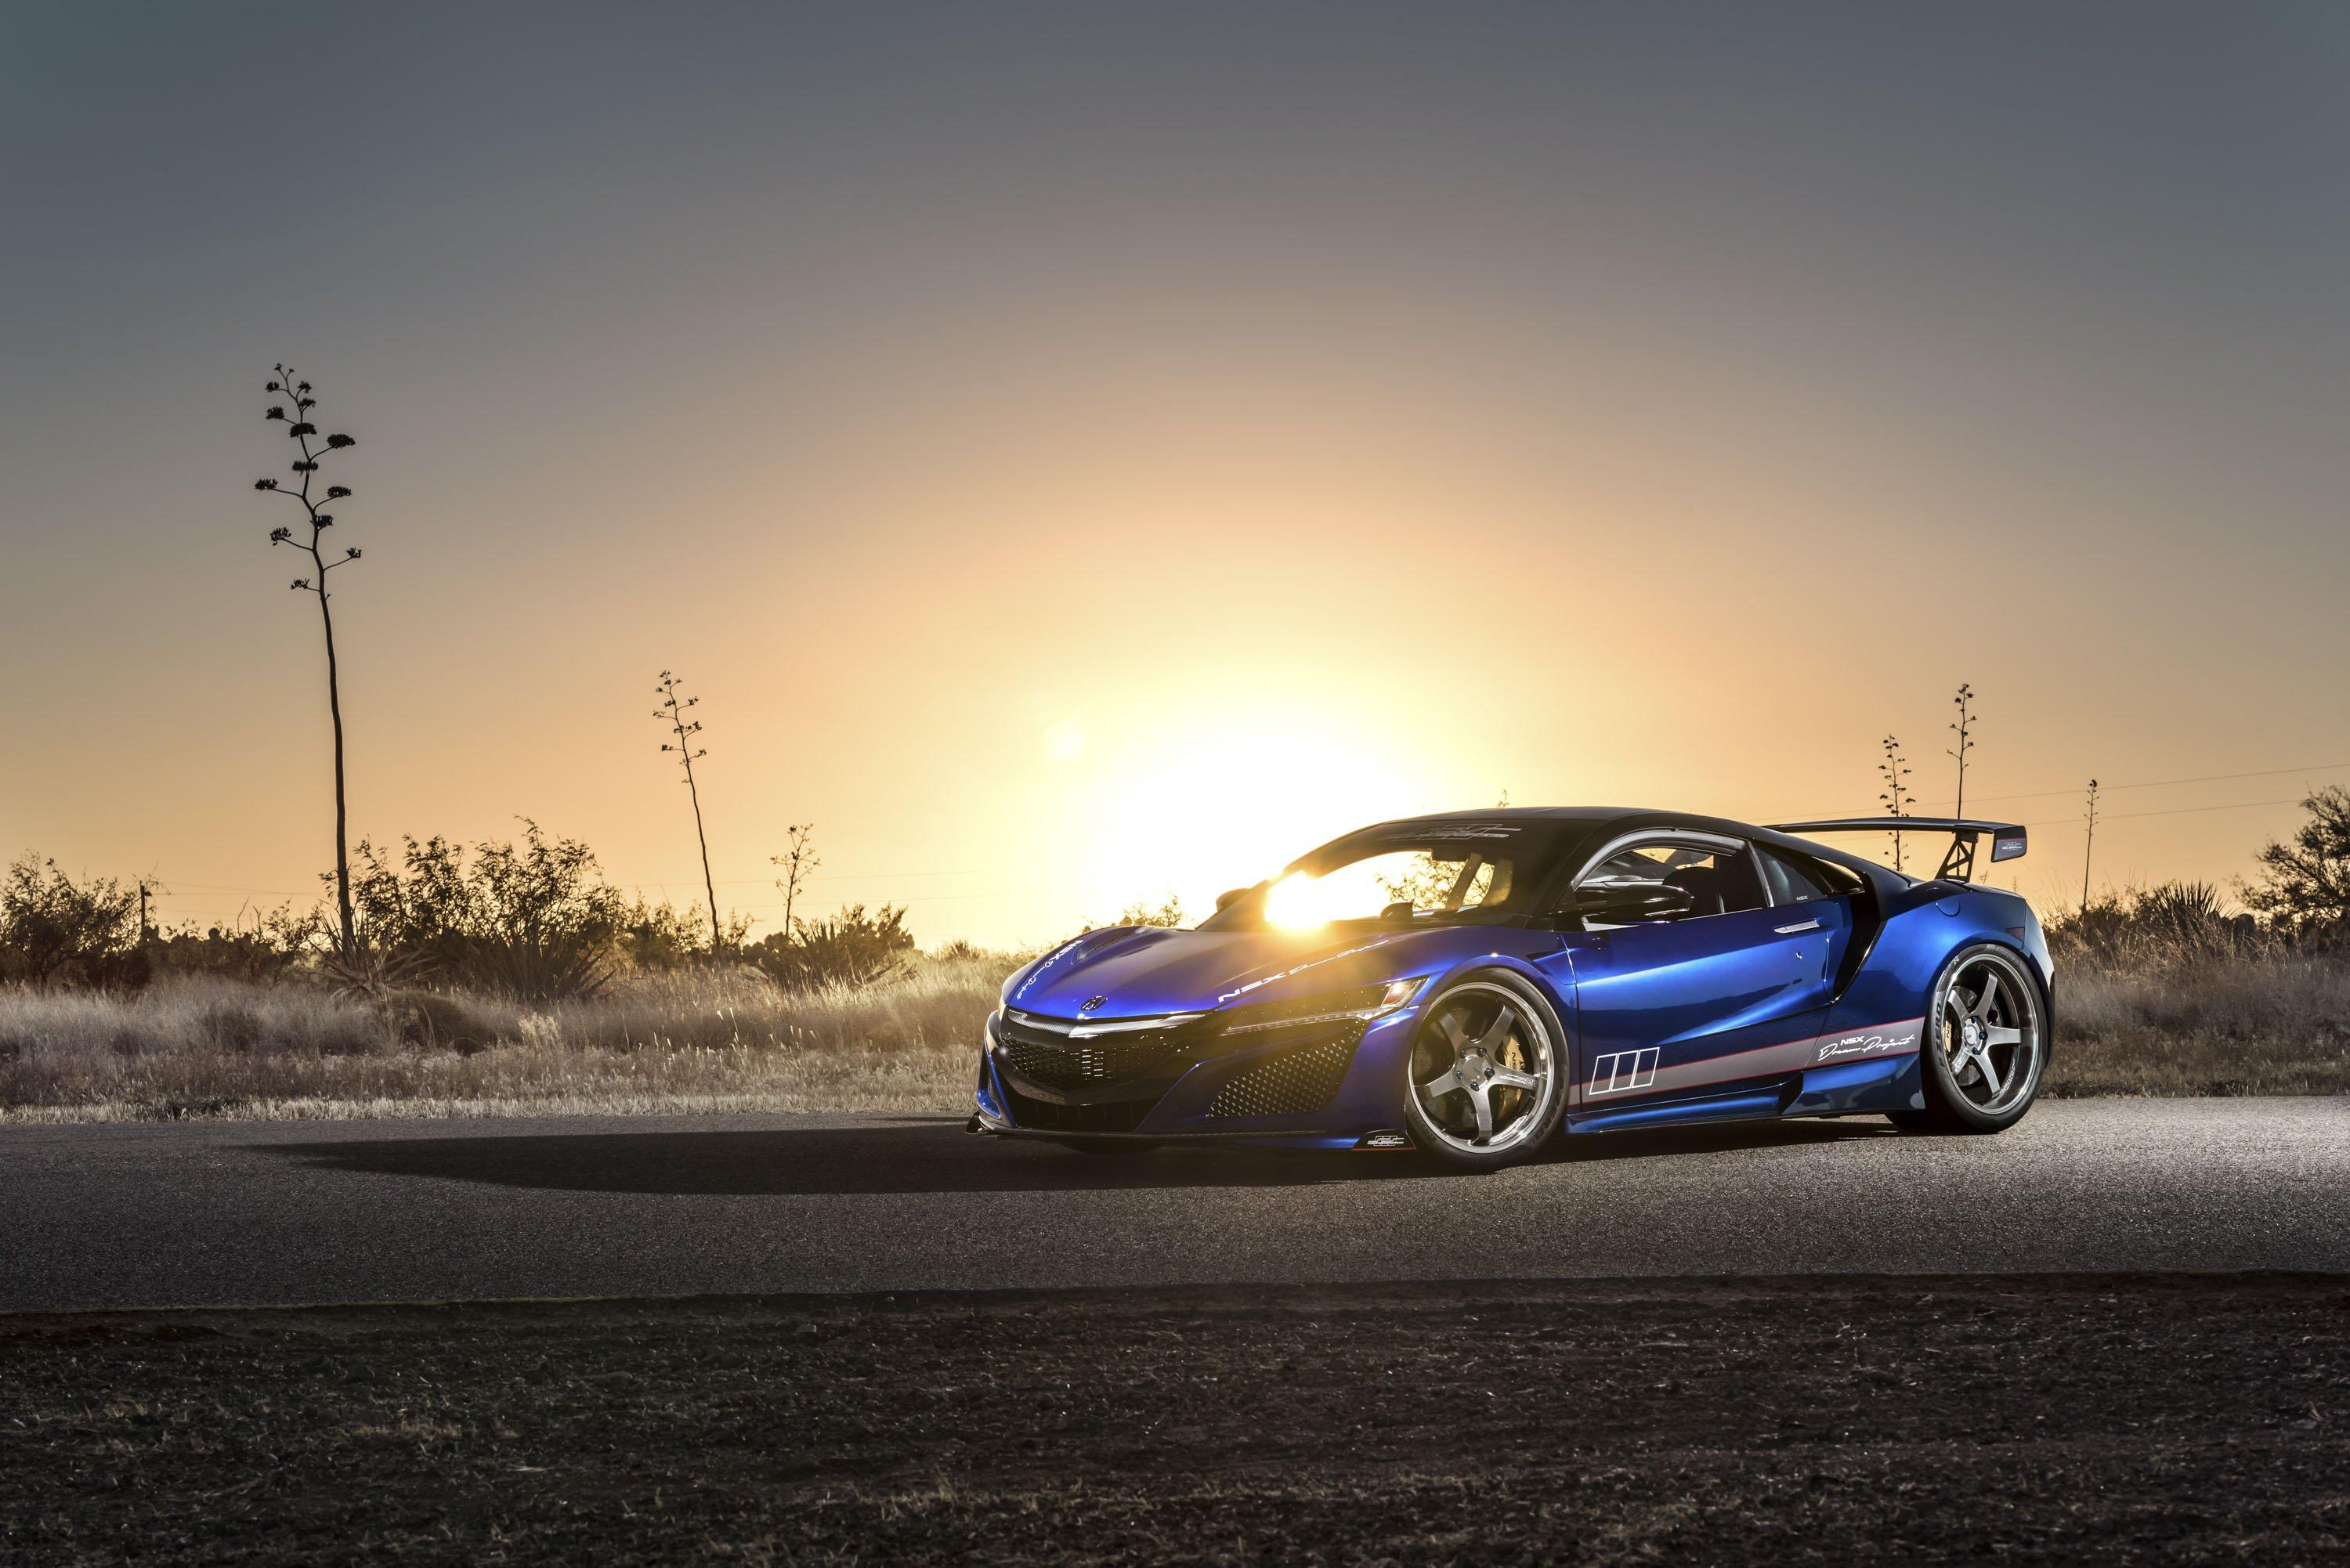 Wallpaper Of The Day: 2017 Acura NSX Dream